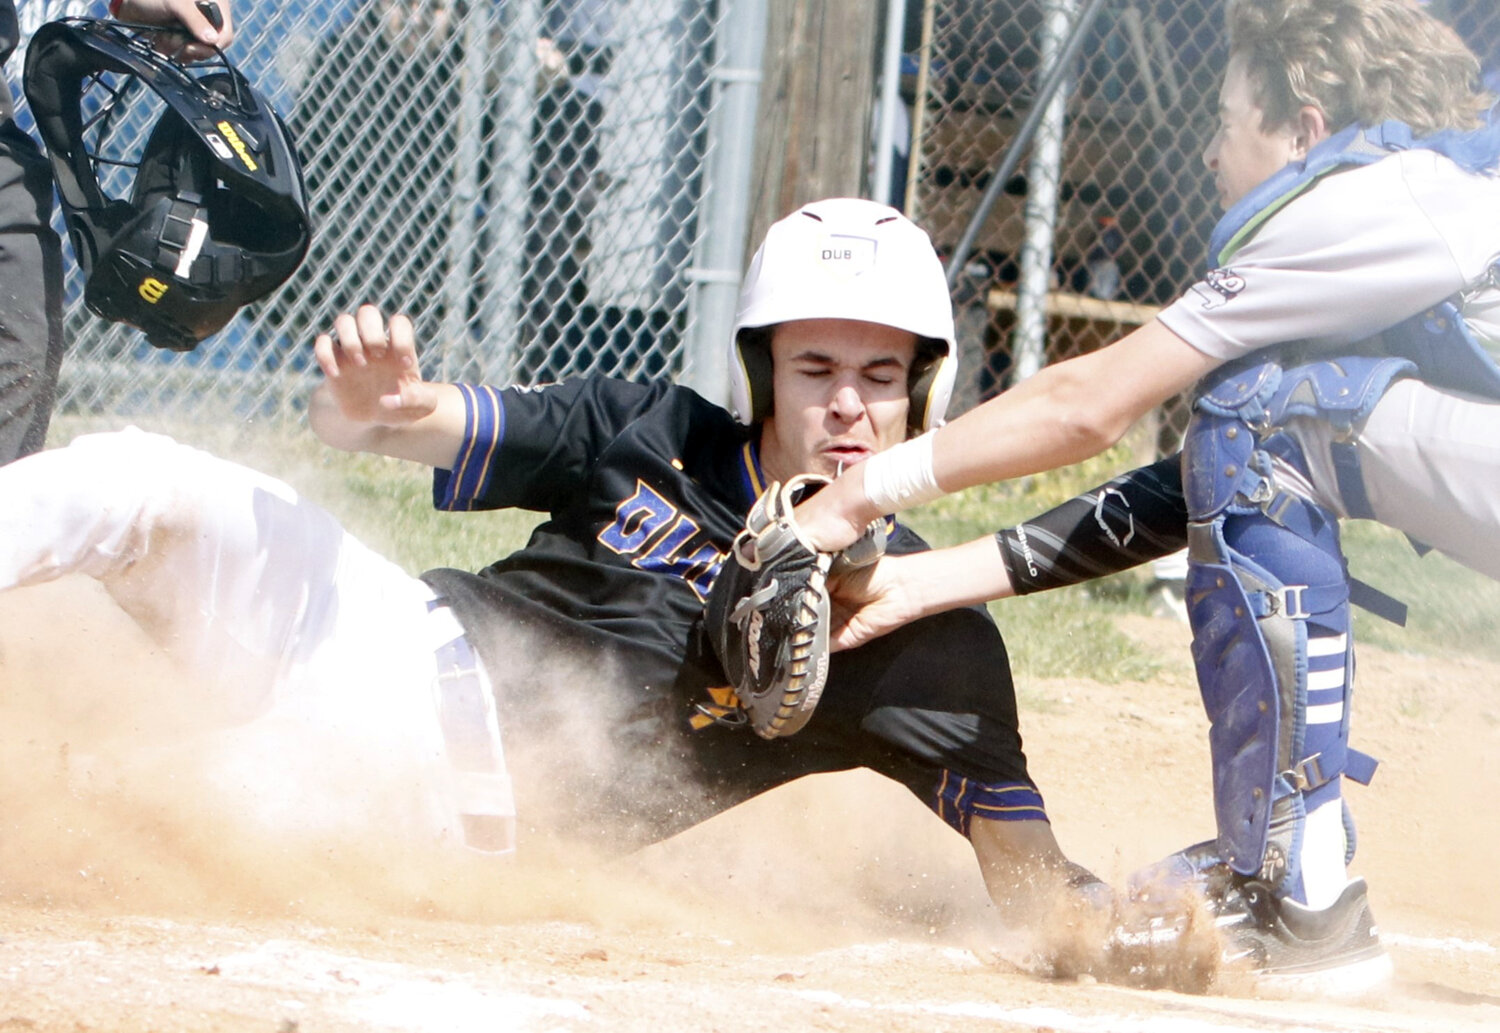 Jake Mitts slides into home plate during last week's game. Mitts was called out on the play.